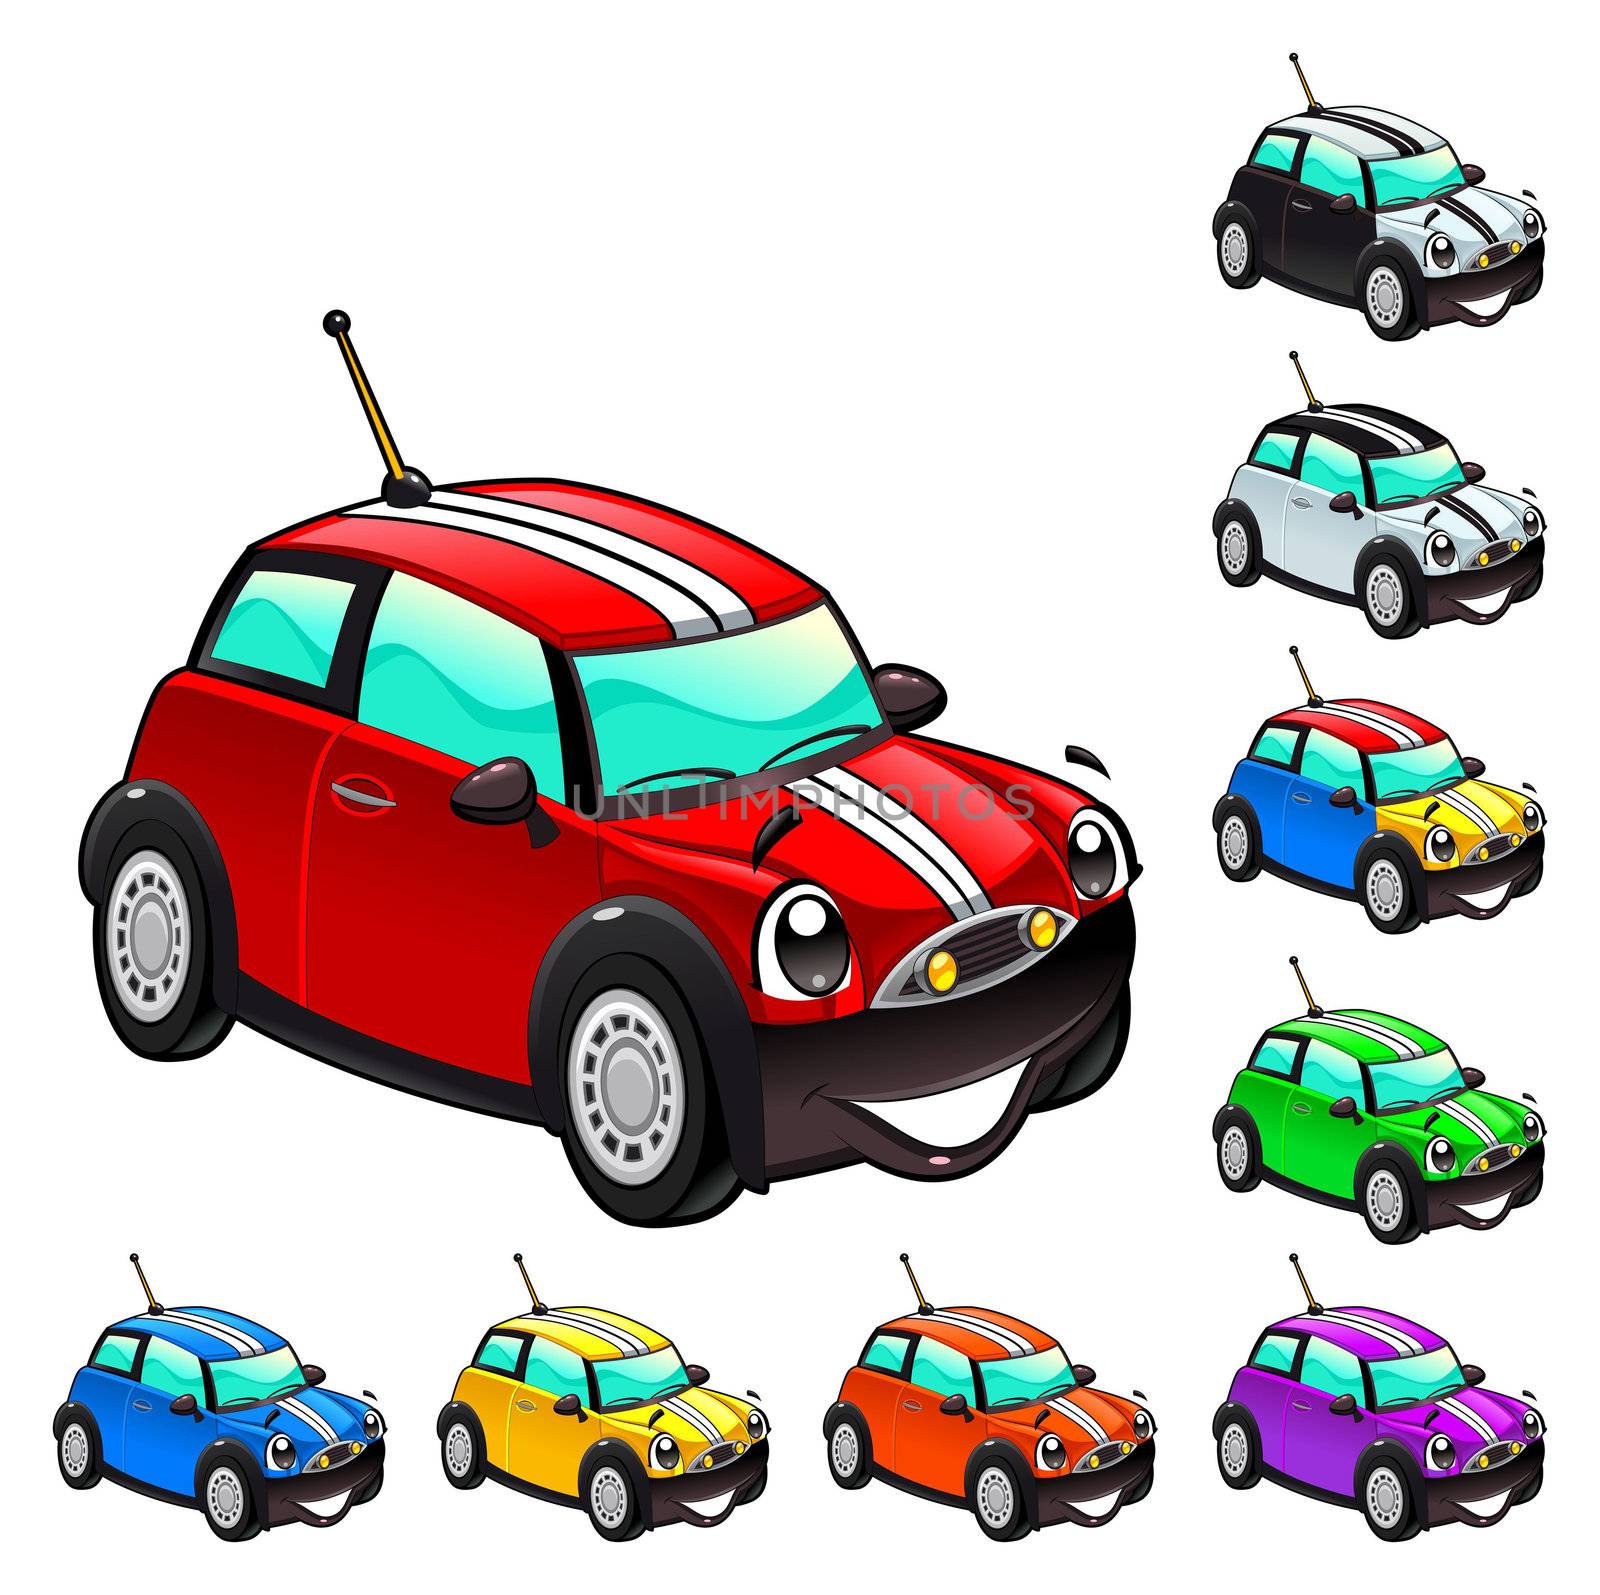 Funny cars in different colors. Cartoon and vector illustration. Funny cars in different colors. Cartoon and vector illustration.